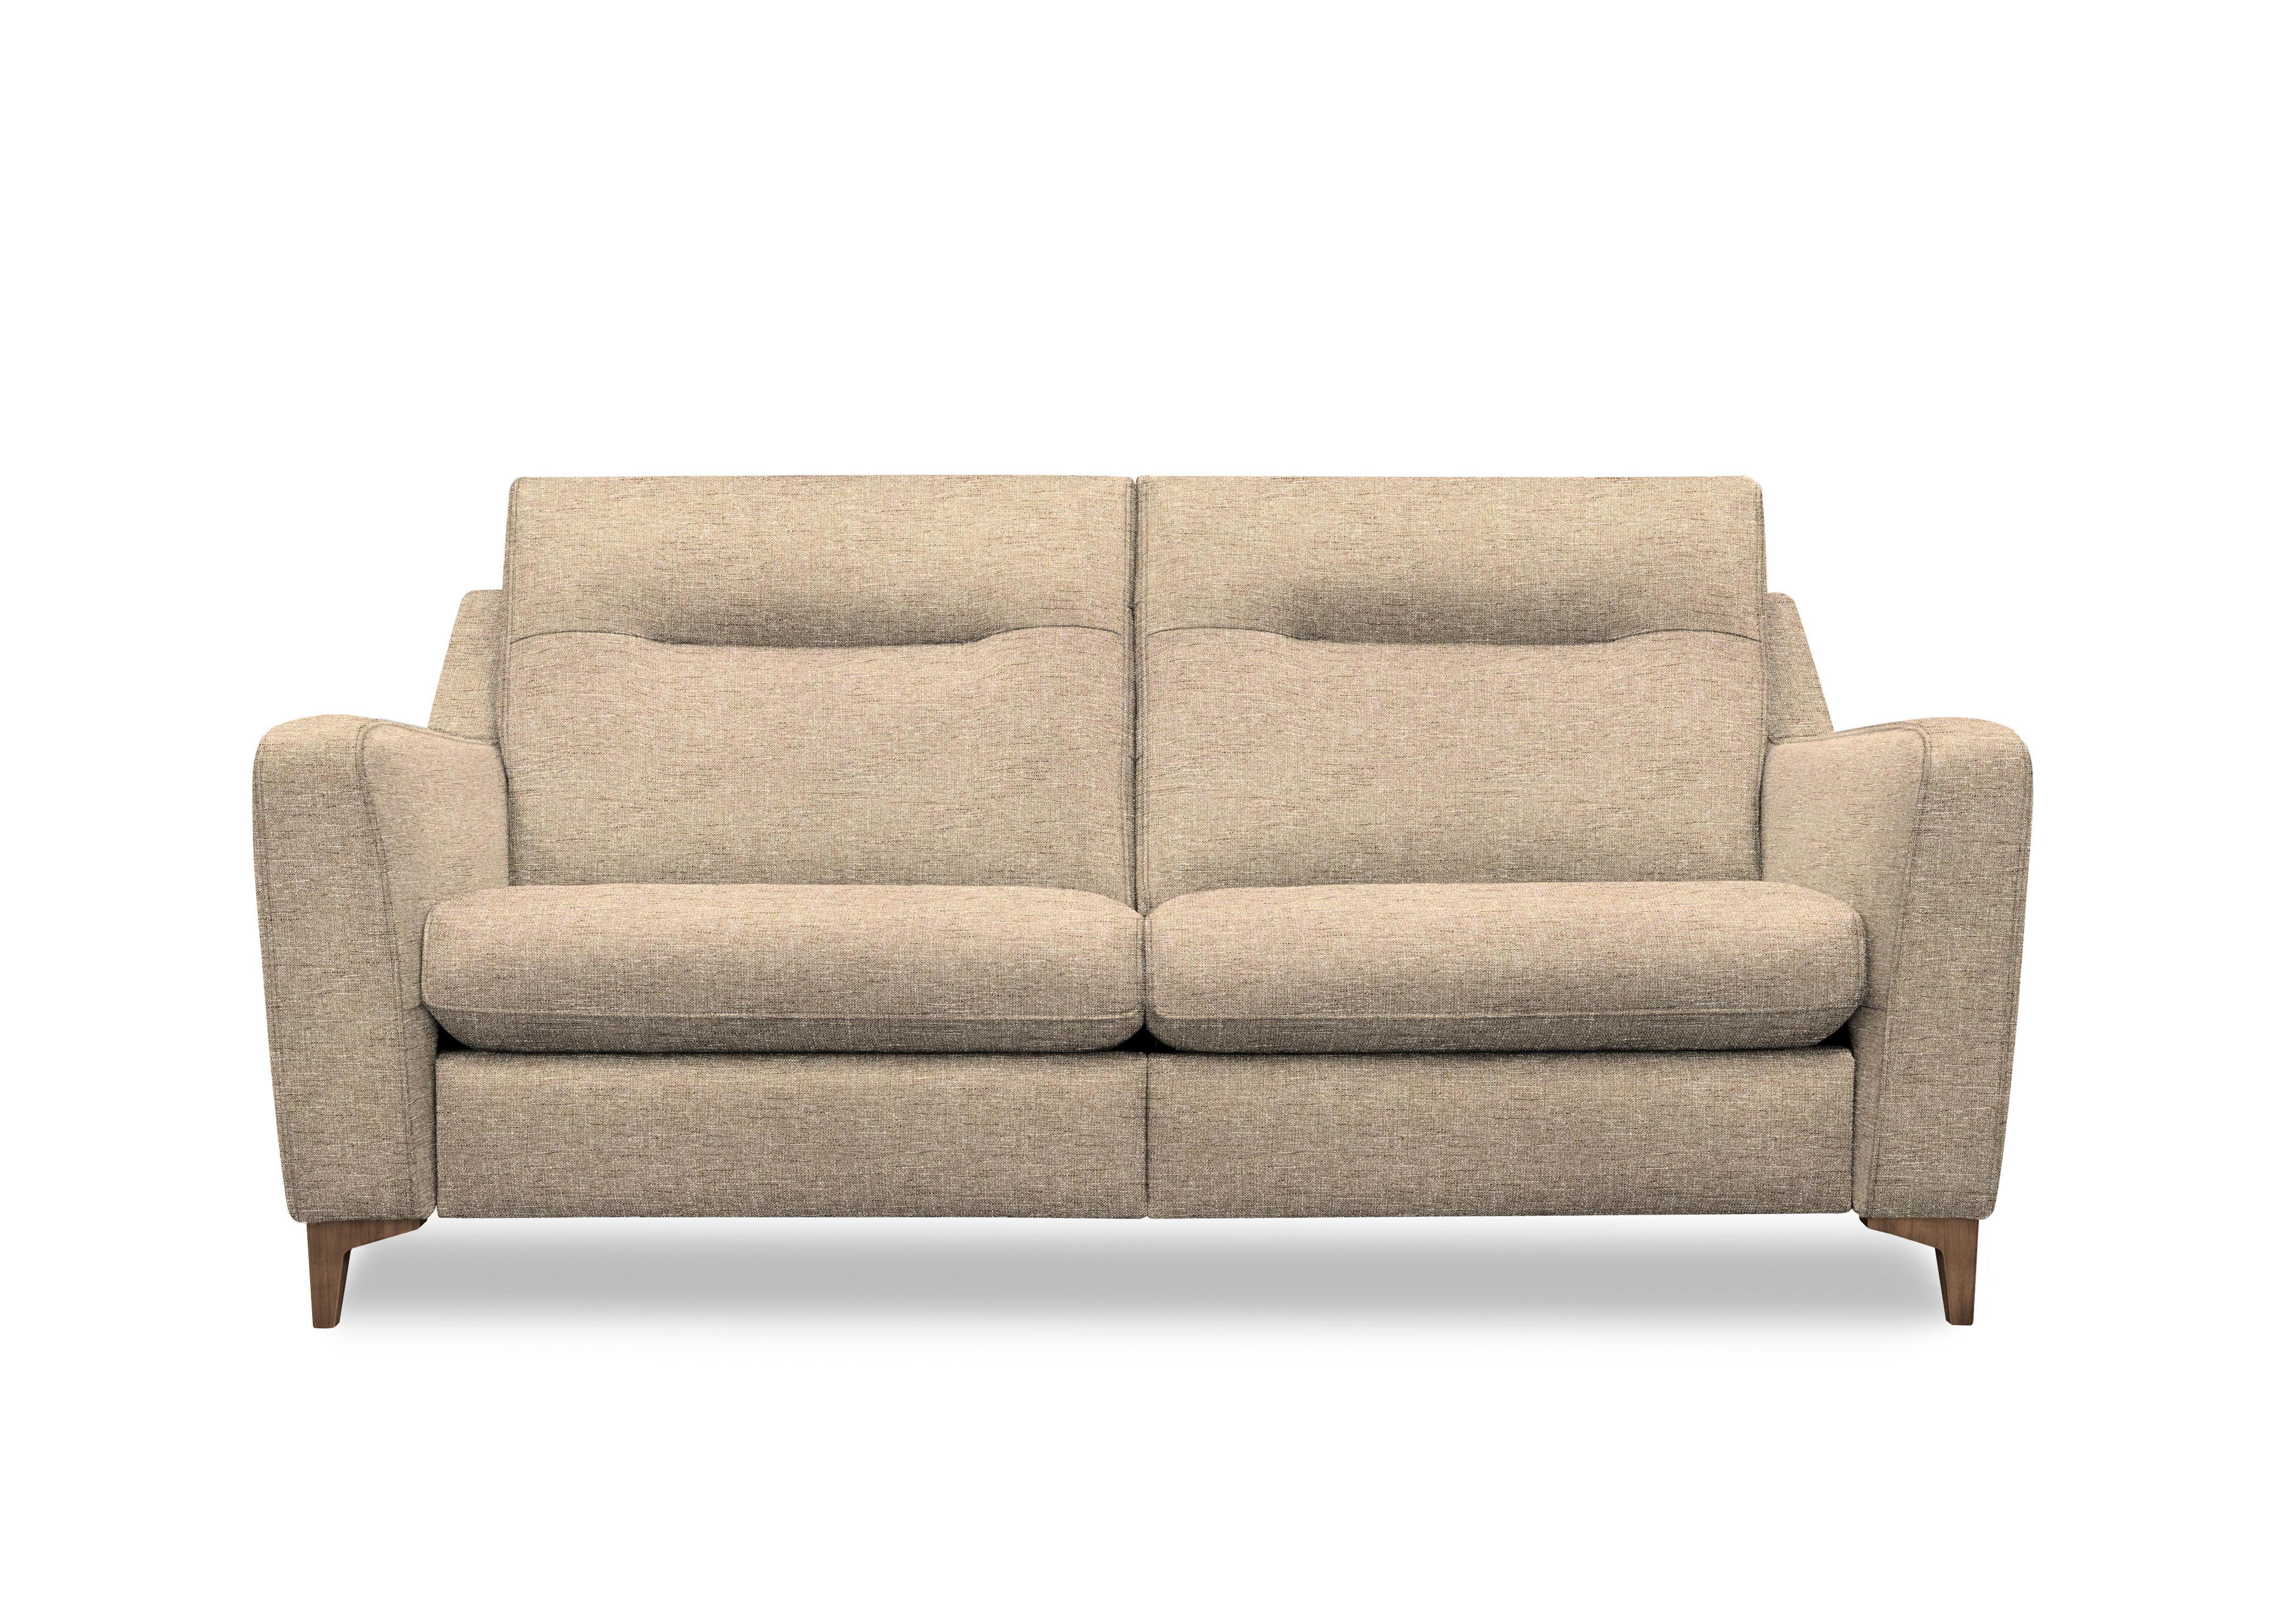 Arlo 3 Seater Fabric Sofa in A022 Dapple Sparrow Wal Ft on Furniture Village